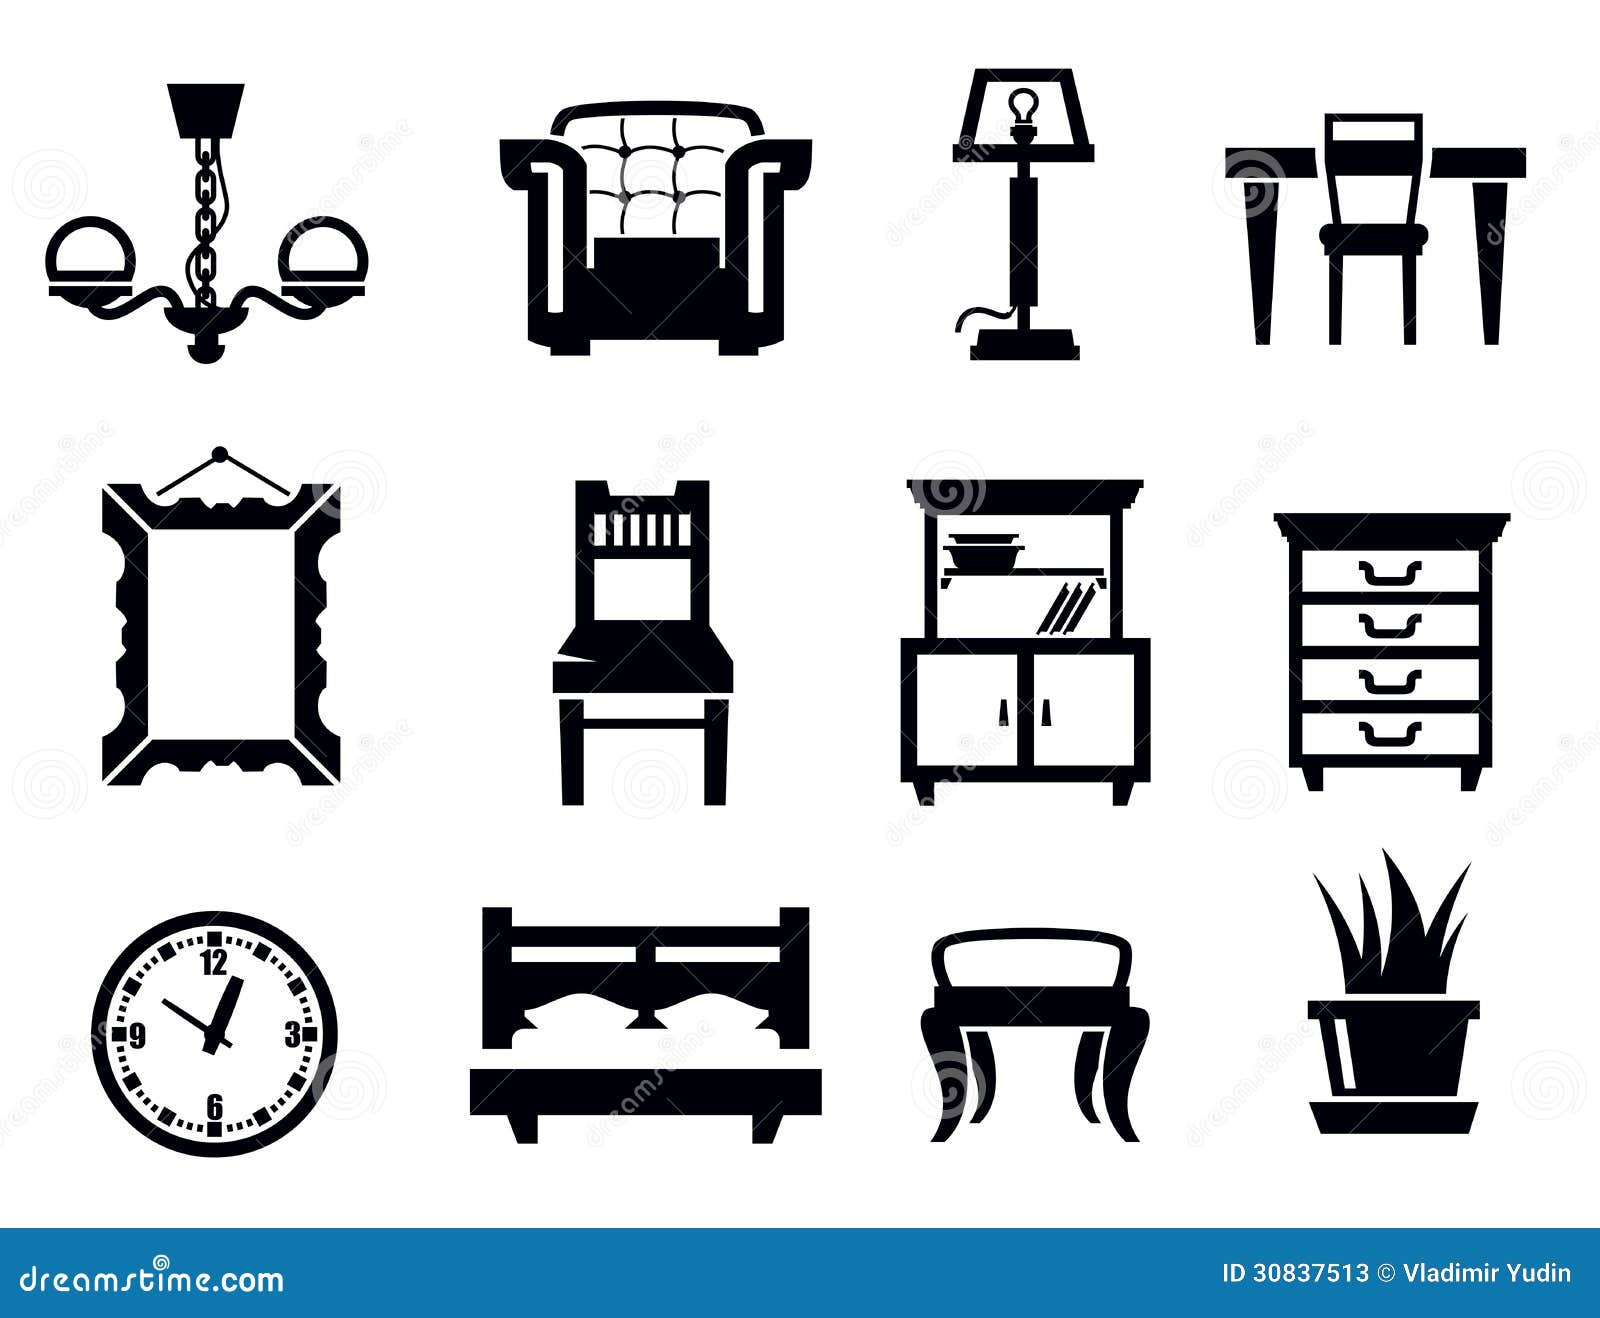 furniture clipart free download - photo #19